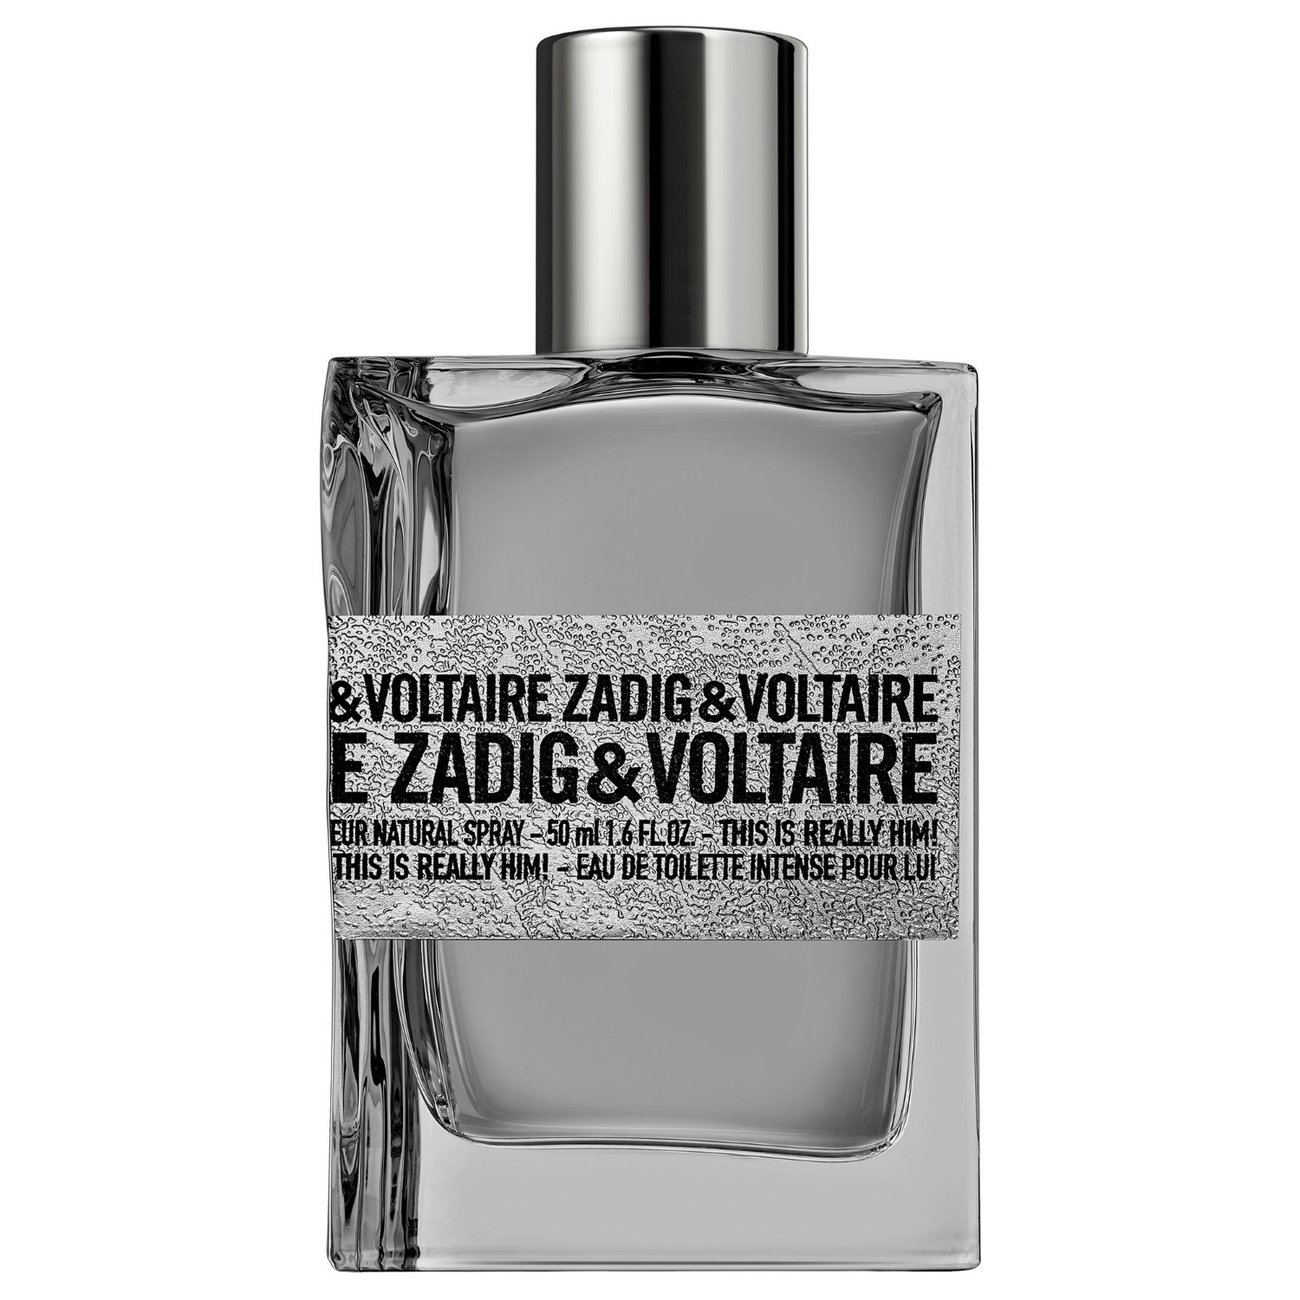 Zadig & Voltaire This is him!